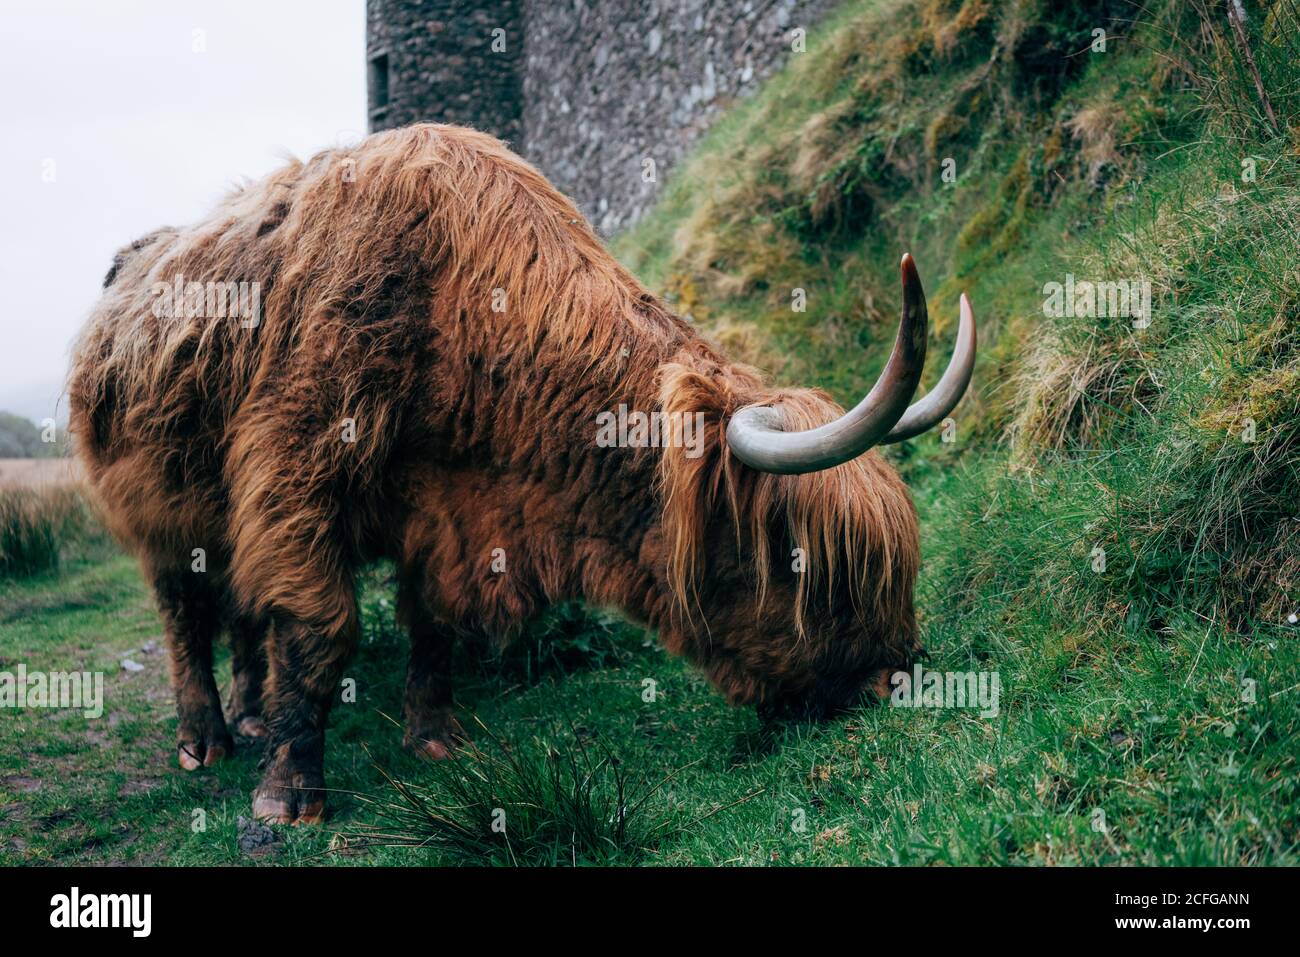 Huge ginger yak feeding on green lawn against aged stone building, Scotland Stock Photo